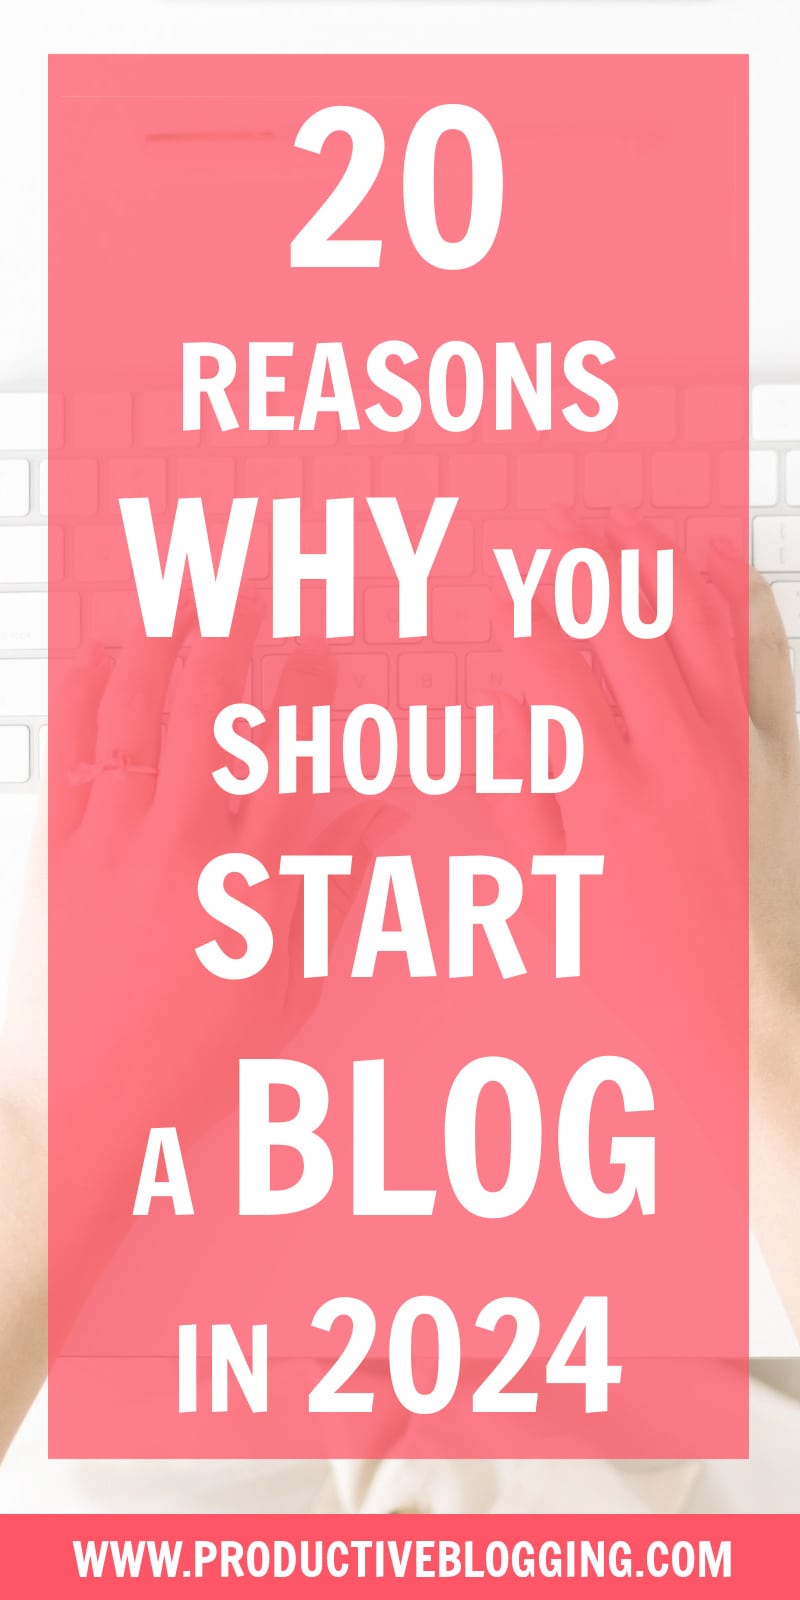 Are you considering starting a blog in 2024? Do you want to earn great money? Be your own boss? Establish your expertise? Open the doors of opportunity? Here are 20 reasons why you should start a blog in 2024… #startablog #startablog2024 #startablogin2024 #reasonstoblog #reasonstostartablog #bloggers #blogger #blogging #blog #newblogger #newbloggers #wannabeblogger #wannabebloggers #benefitsofblogging #bloggingisnotdead #whyblog #whystartablog #whystartablogin2024 #productiveblogging